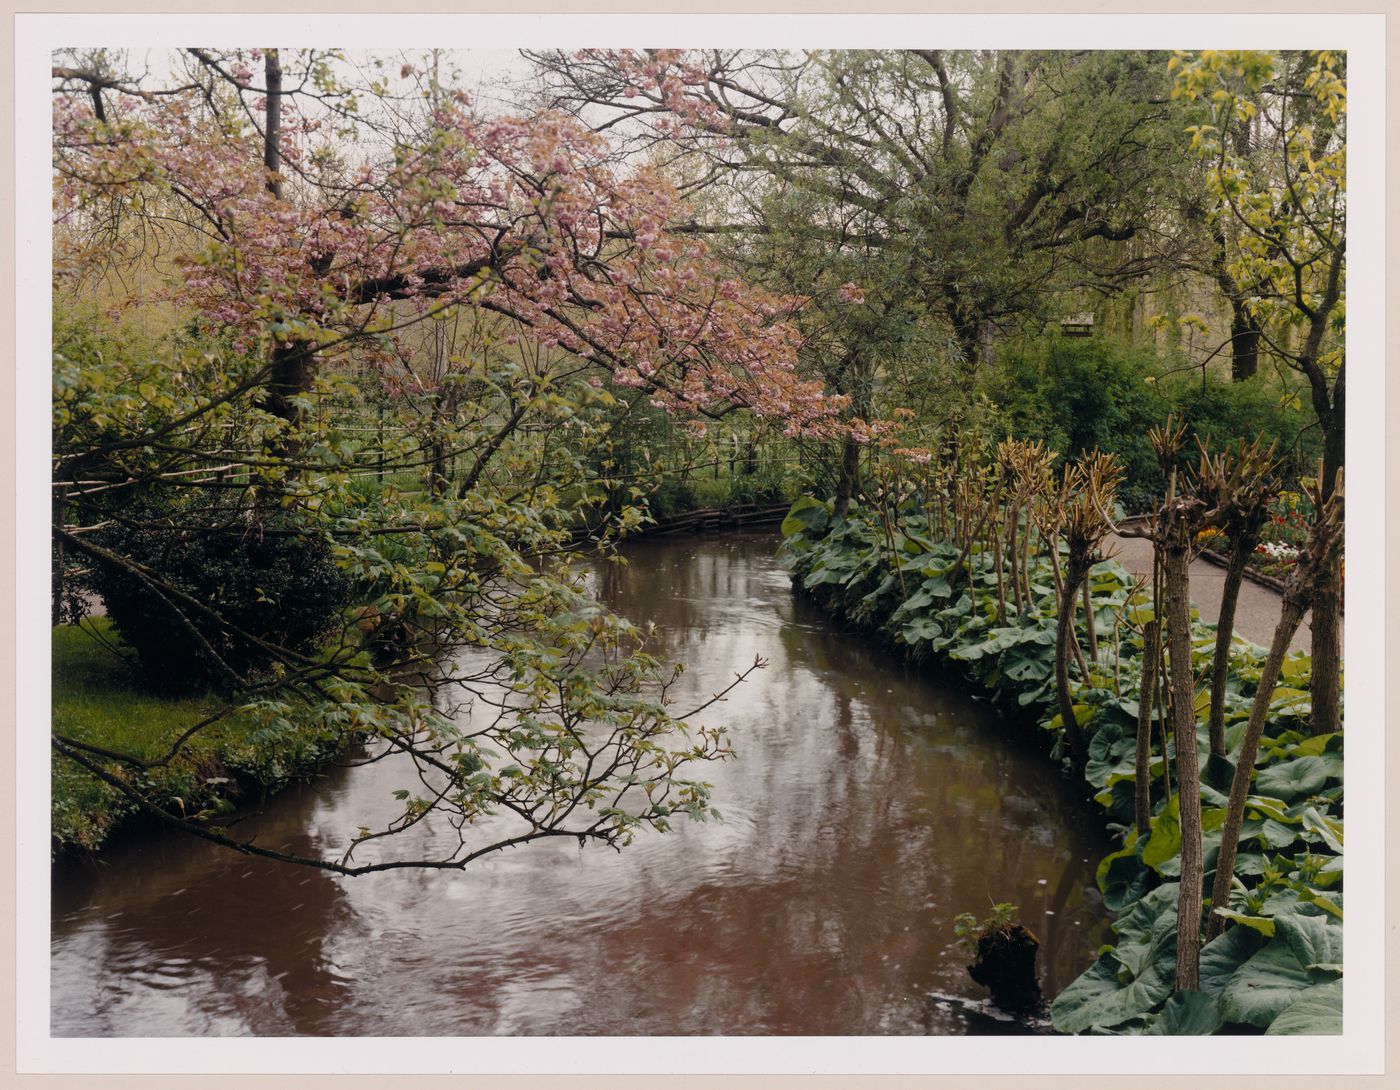 The brook in the Spring, Monet Gardens, Giverny, France